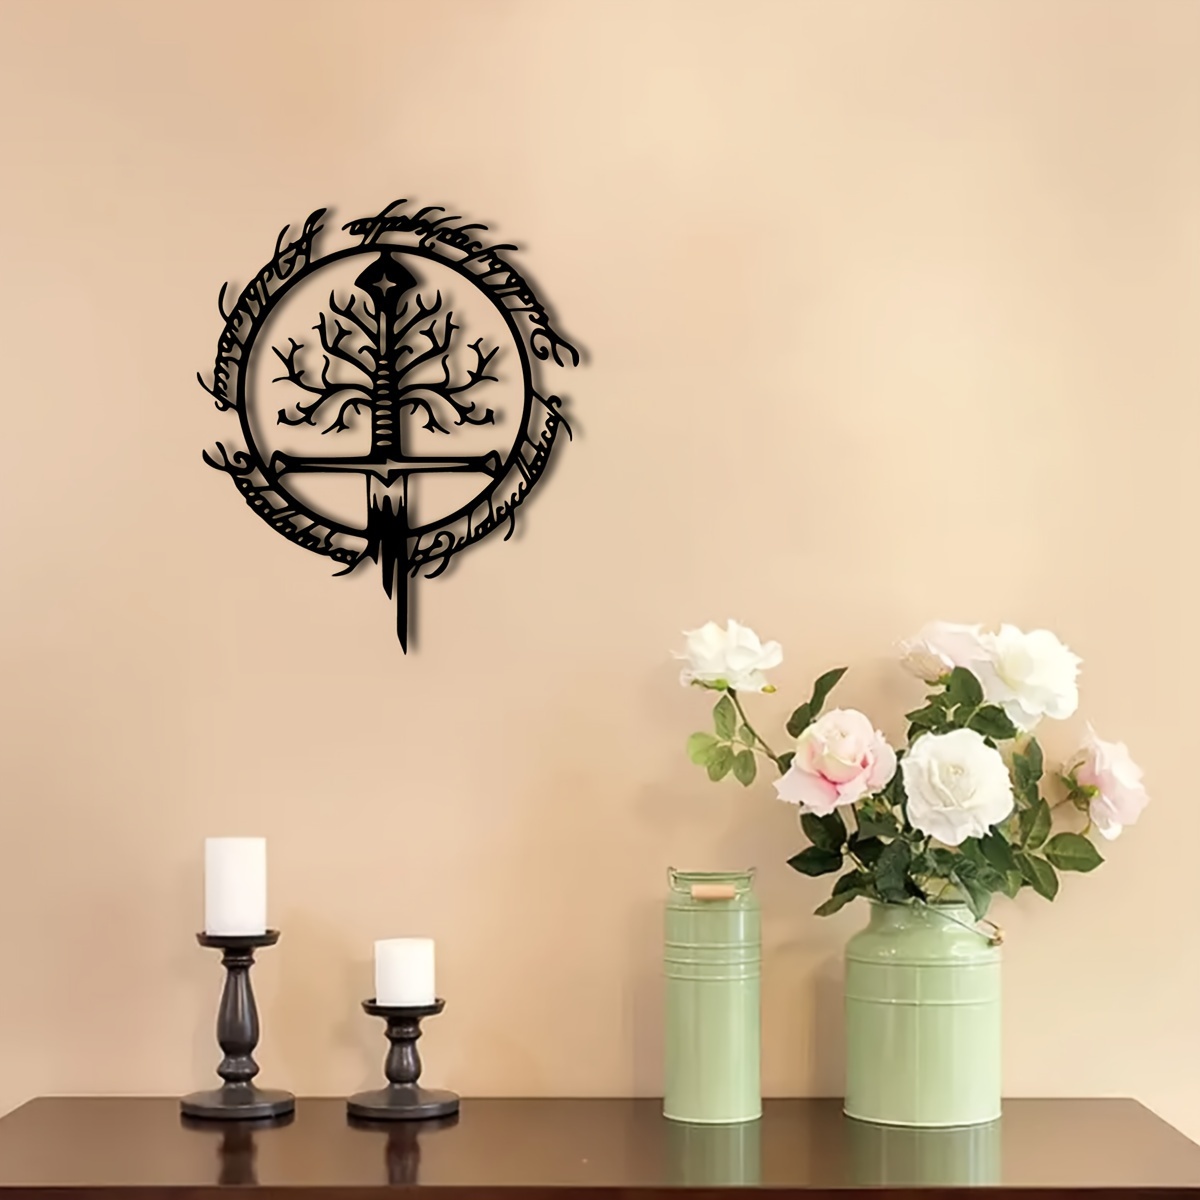 

Lord Of The Rings Metal Wall Art - Iron Oath Decor, Perfect Gift For Him Or Housewarming